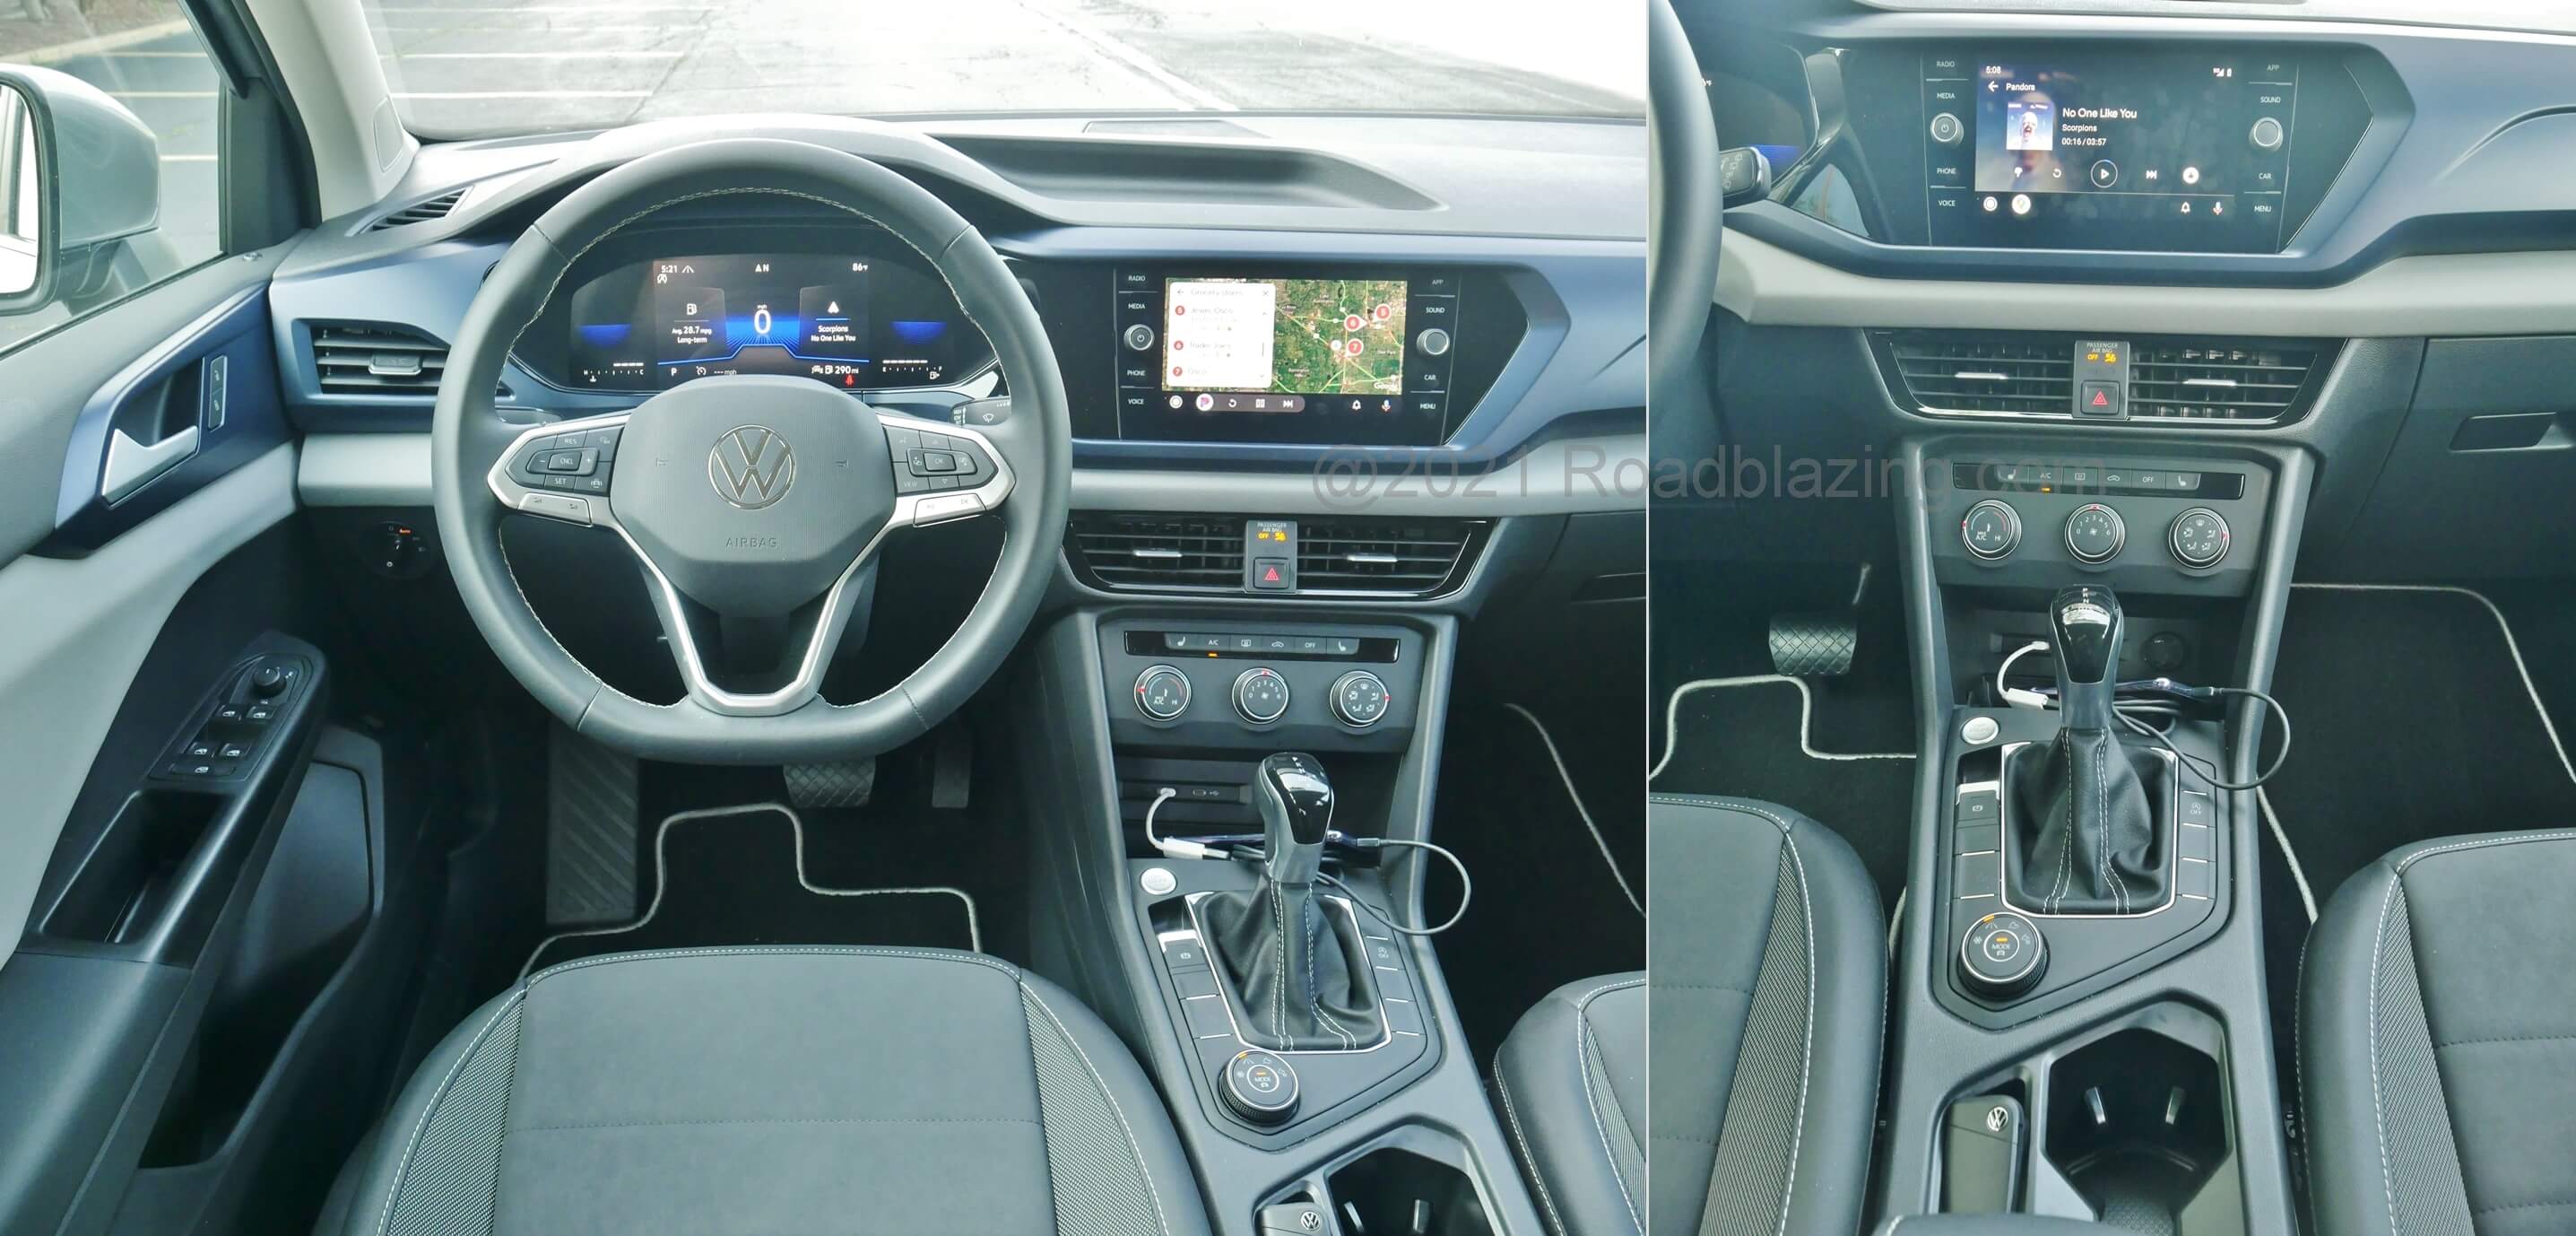 2022 Volkswagen Taos SE 4Motion: Android Auto phone projection displays music selection & navigation directions in Digital Cockpit cluster